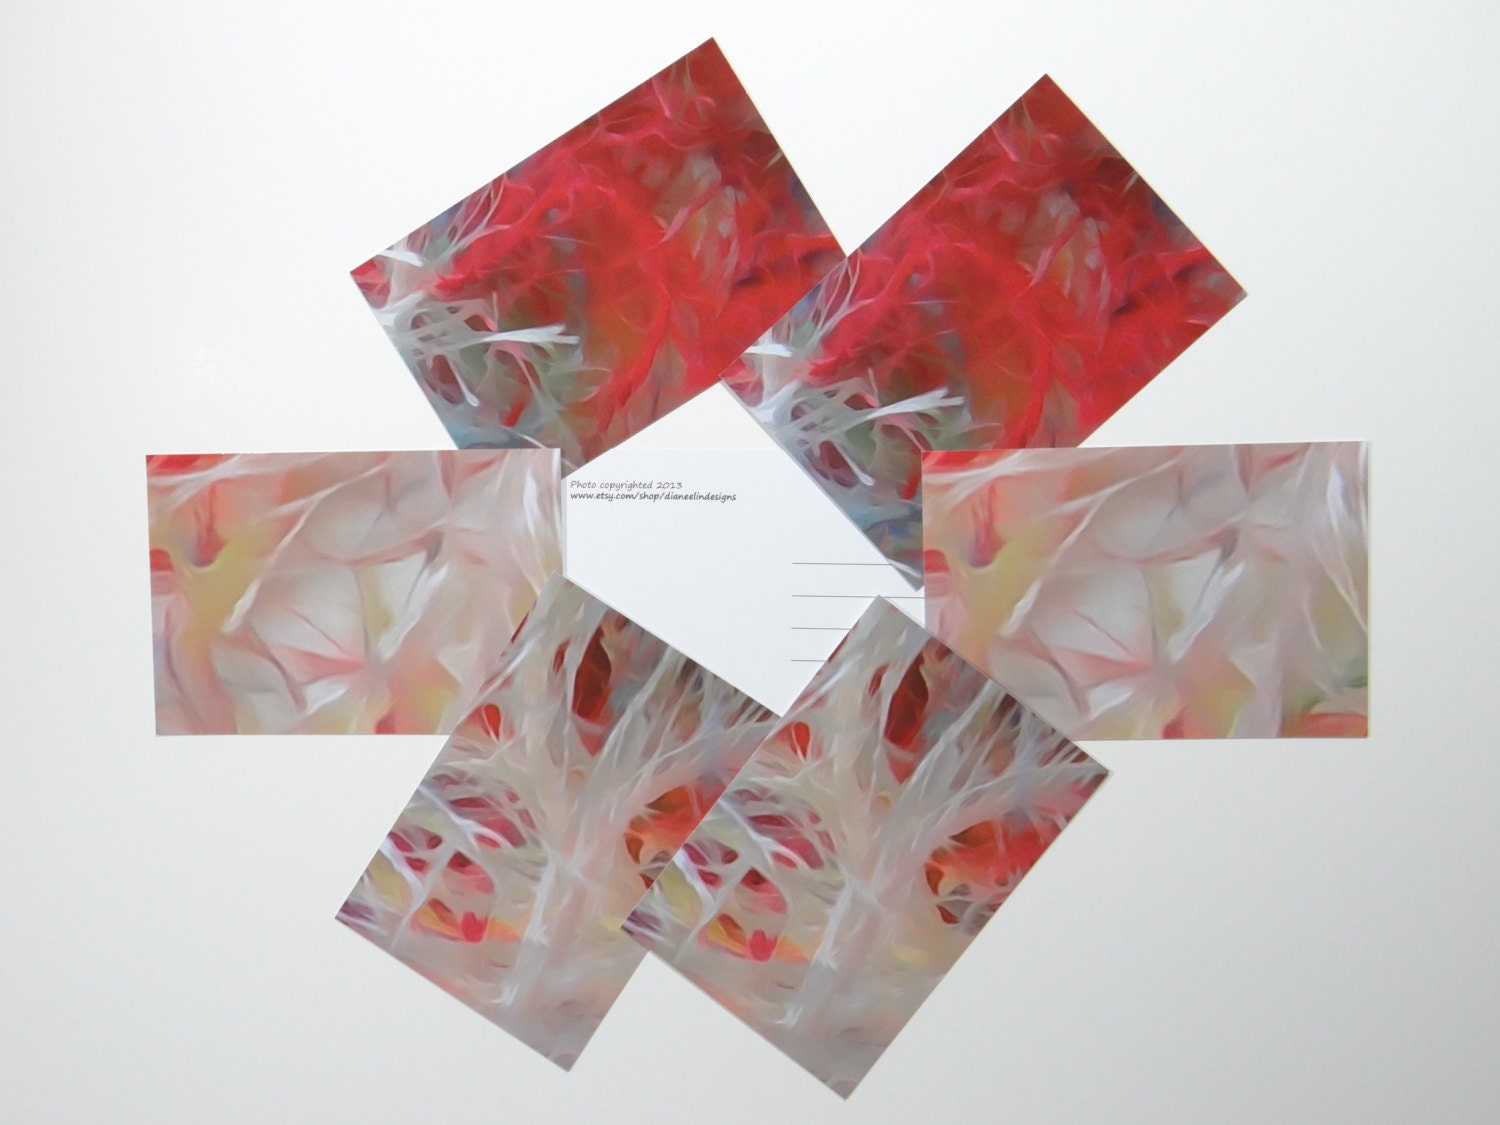 Abstract Art 4 X 6 Postcards, Photo Watecolor, Set of Six 2 of Each, Glossy  Finish on Front, Matte Finish on Back 